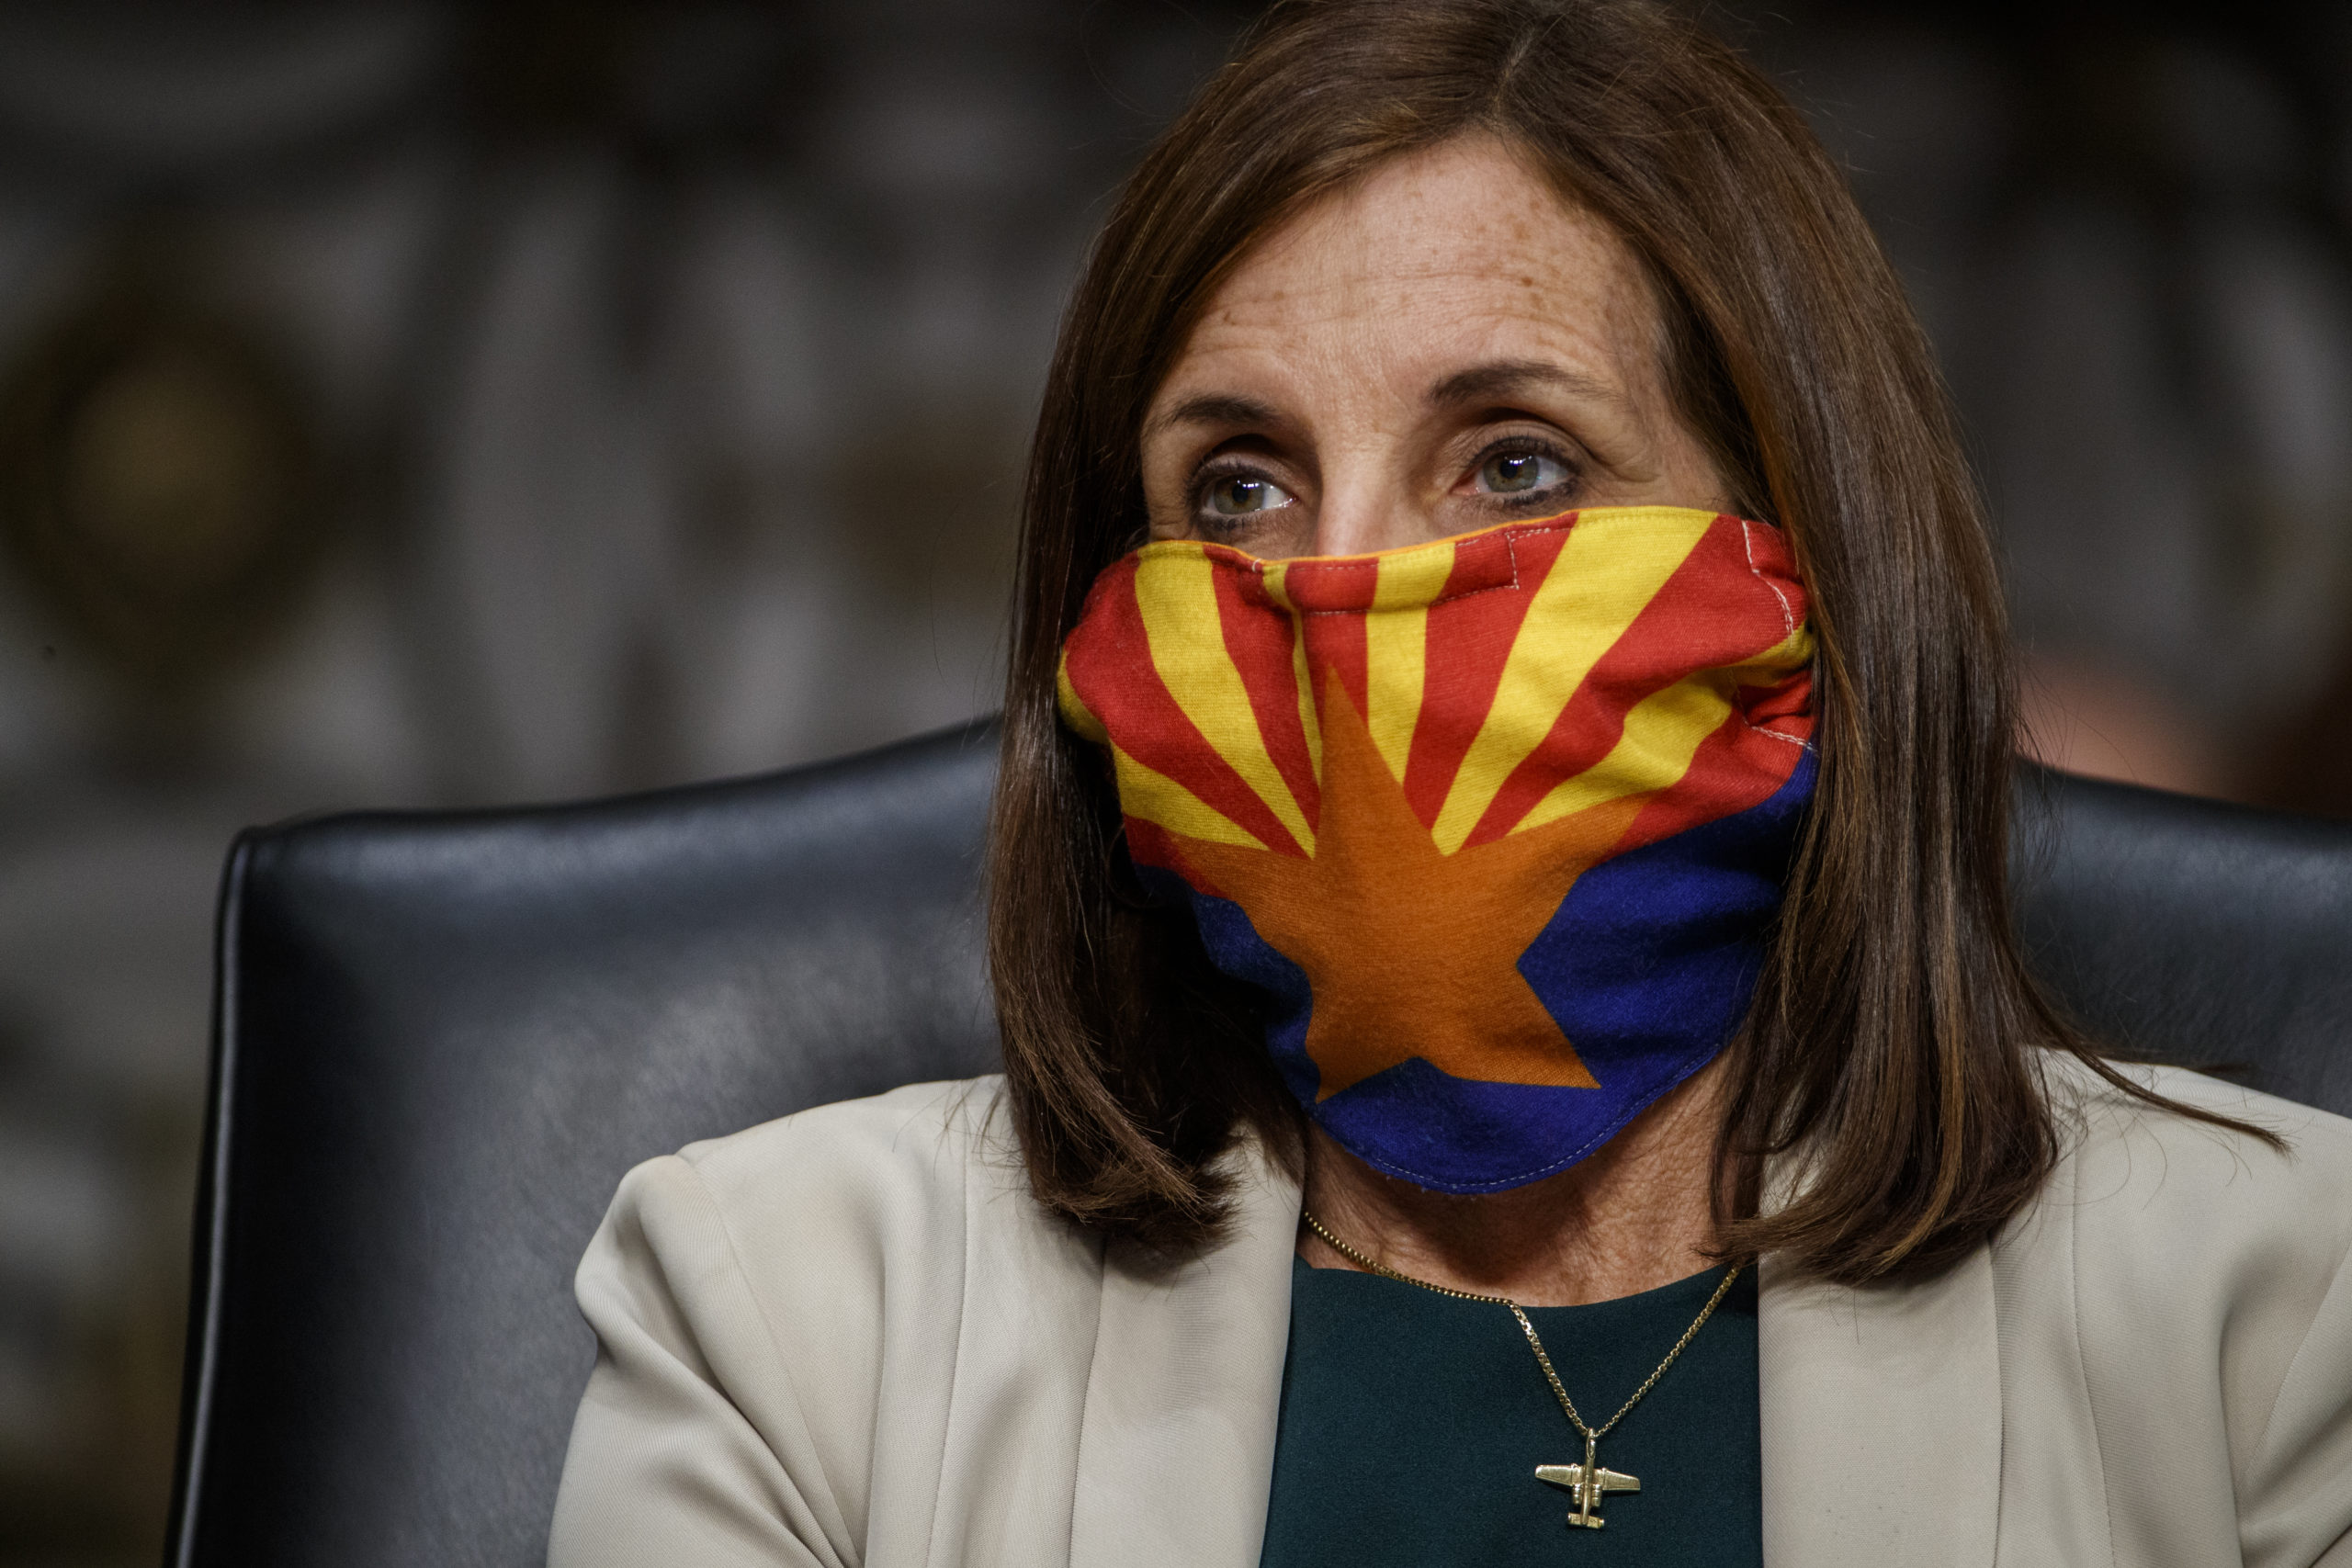 WASHINGTON, DC - MAY 06: Sen. from Arizona Martha McSally (R-AZ) wears a mask depicting the Arizona state flag as she listens to testimony during the Senate Armed Services Committee hearing on the Department of Defense Spectrum Policy and the Impact of the Federal Communications Commissions Ligado Decision on National Security during the COVID-19 coronavirus pandemic on Capitol Hill on May 6, 2020 in Washington, DC. (Photo by Shawn Thew - Pool/Getty Images)